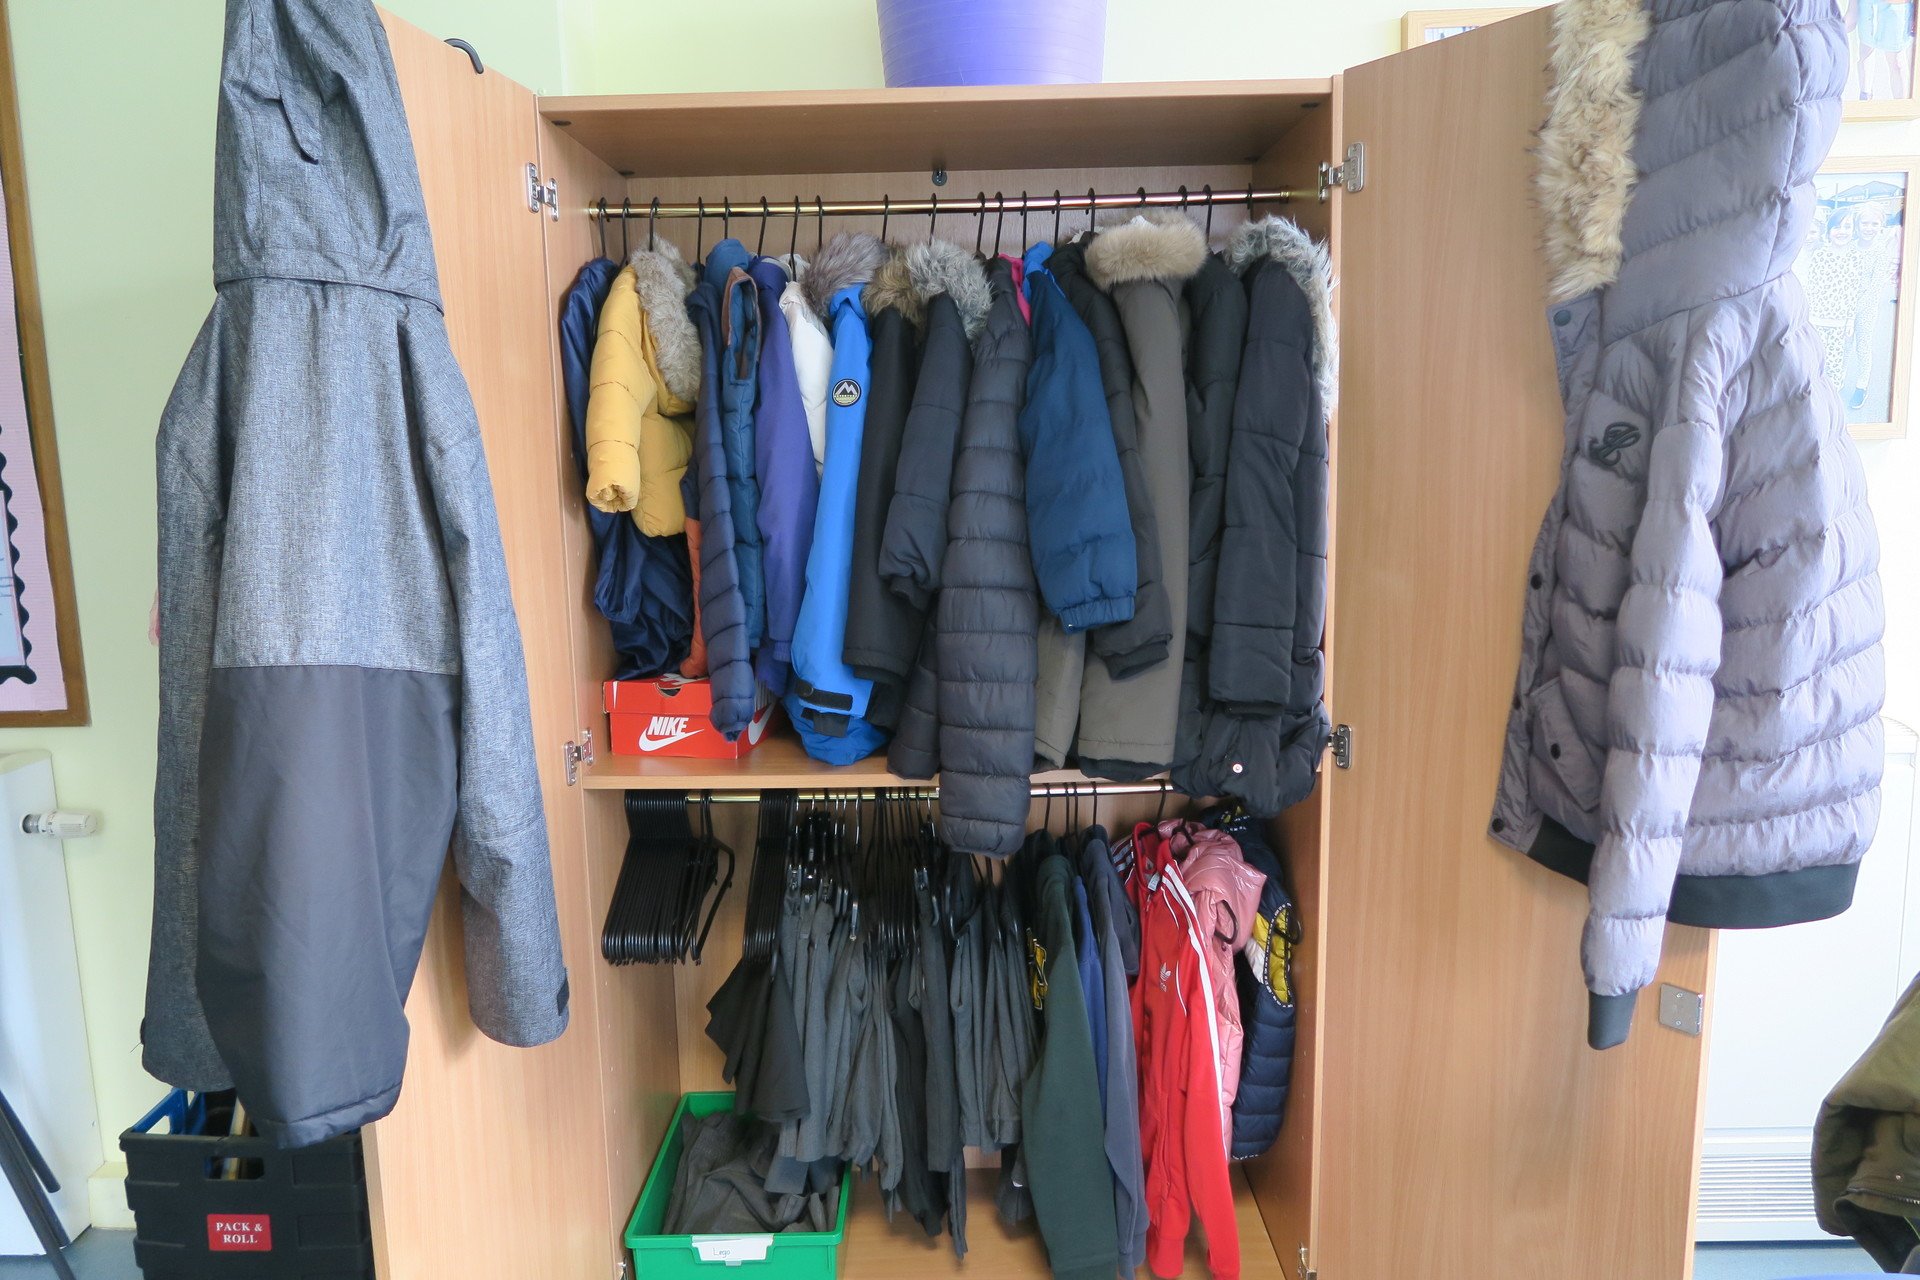 Clothing in 'The Cupboard'